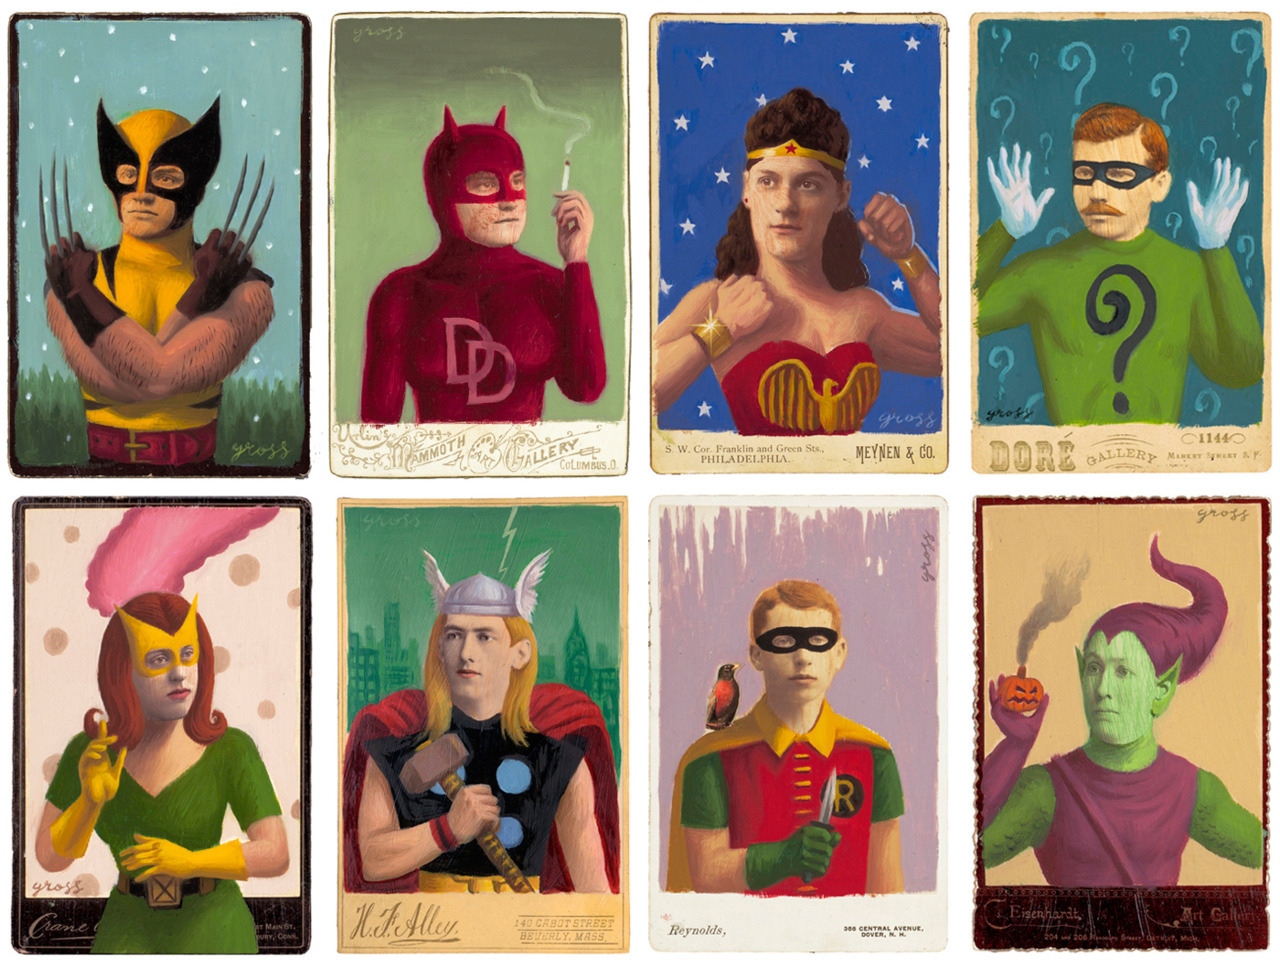 Alex Gross’ “Heroes, Villains and Monsters” artwork is now available as limited edition giclee print sets! Multiple sets can be combined in one box, or can be ordered separately with individual boxes. More information can be found HERE.
Heroes,...